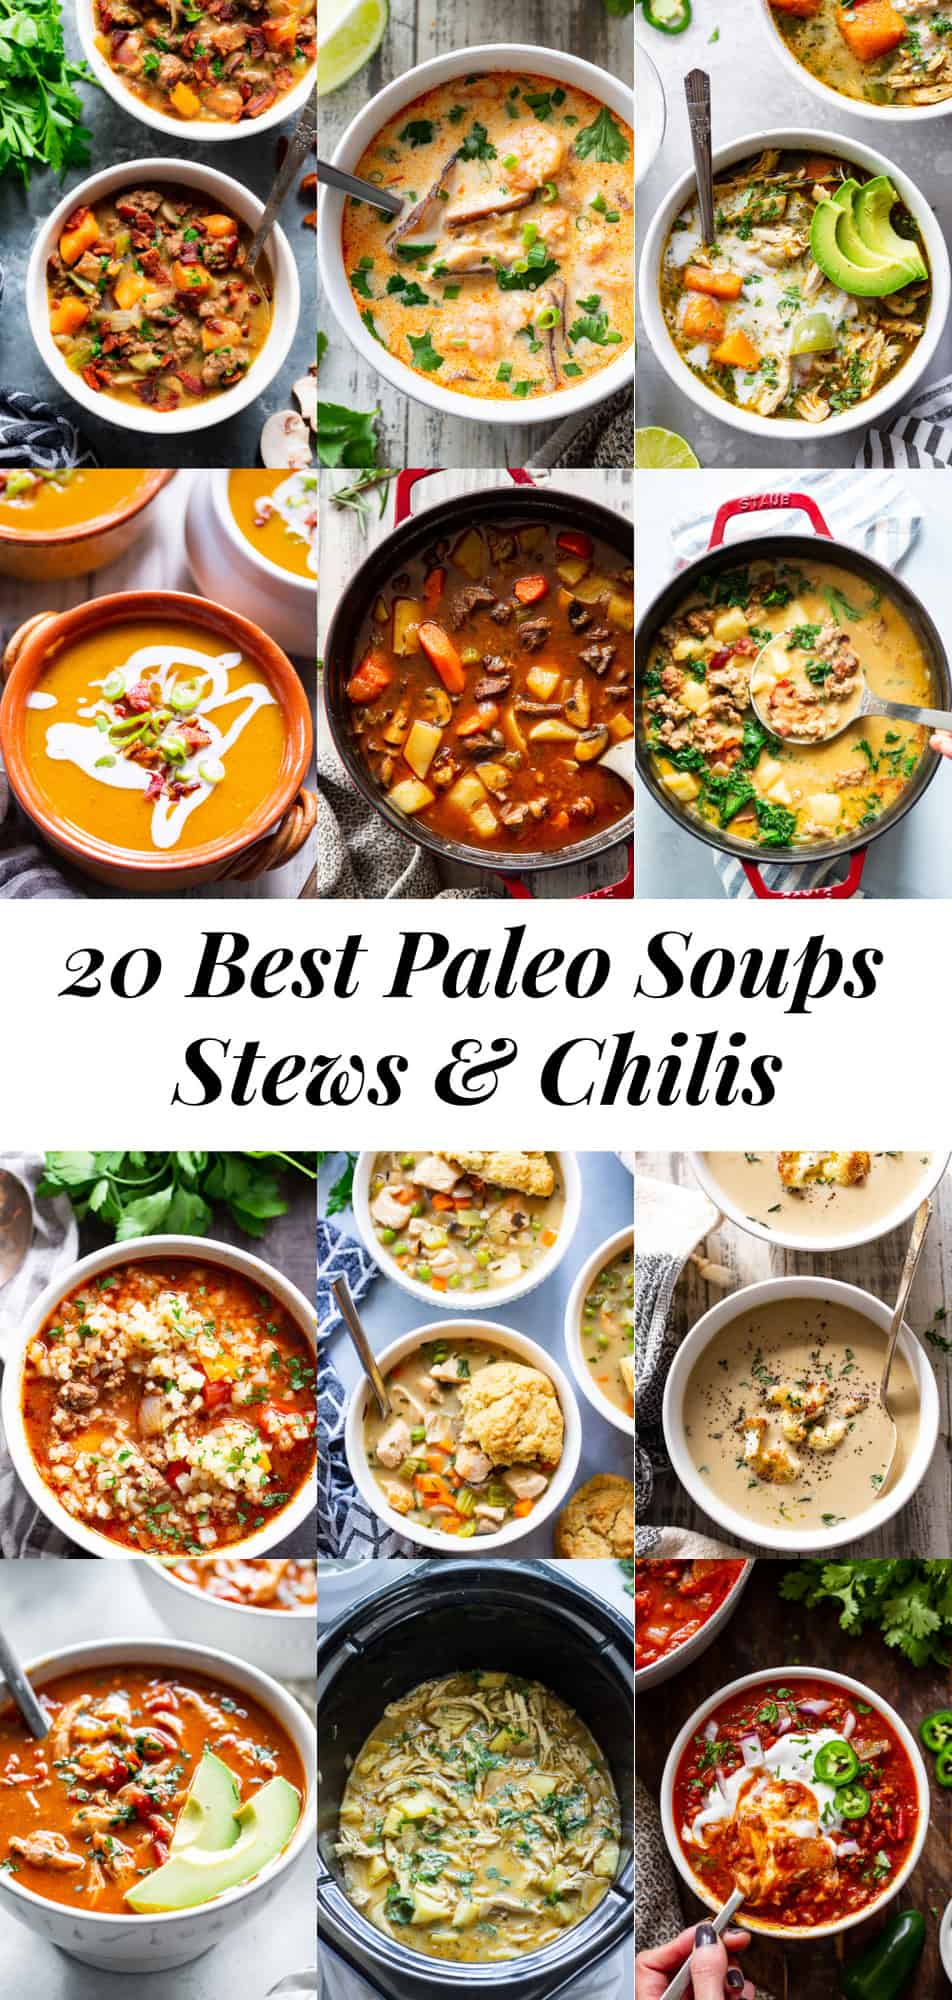 It's soup season and I'm rounding up all of my cozy favorites!  These paleo soups, chilis and stews are nourishing, simple to prepare and of course delicious! #paleo #cleaneating #whole30